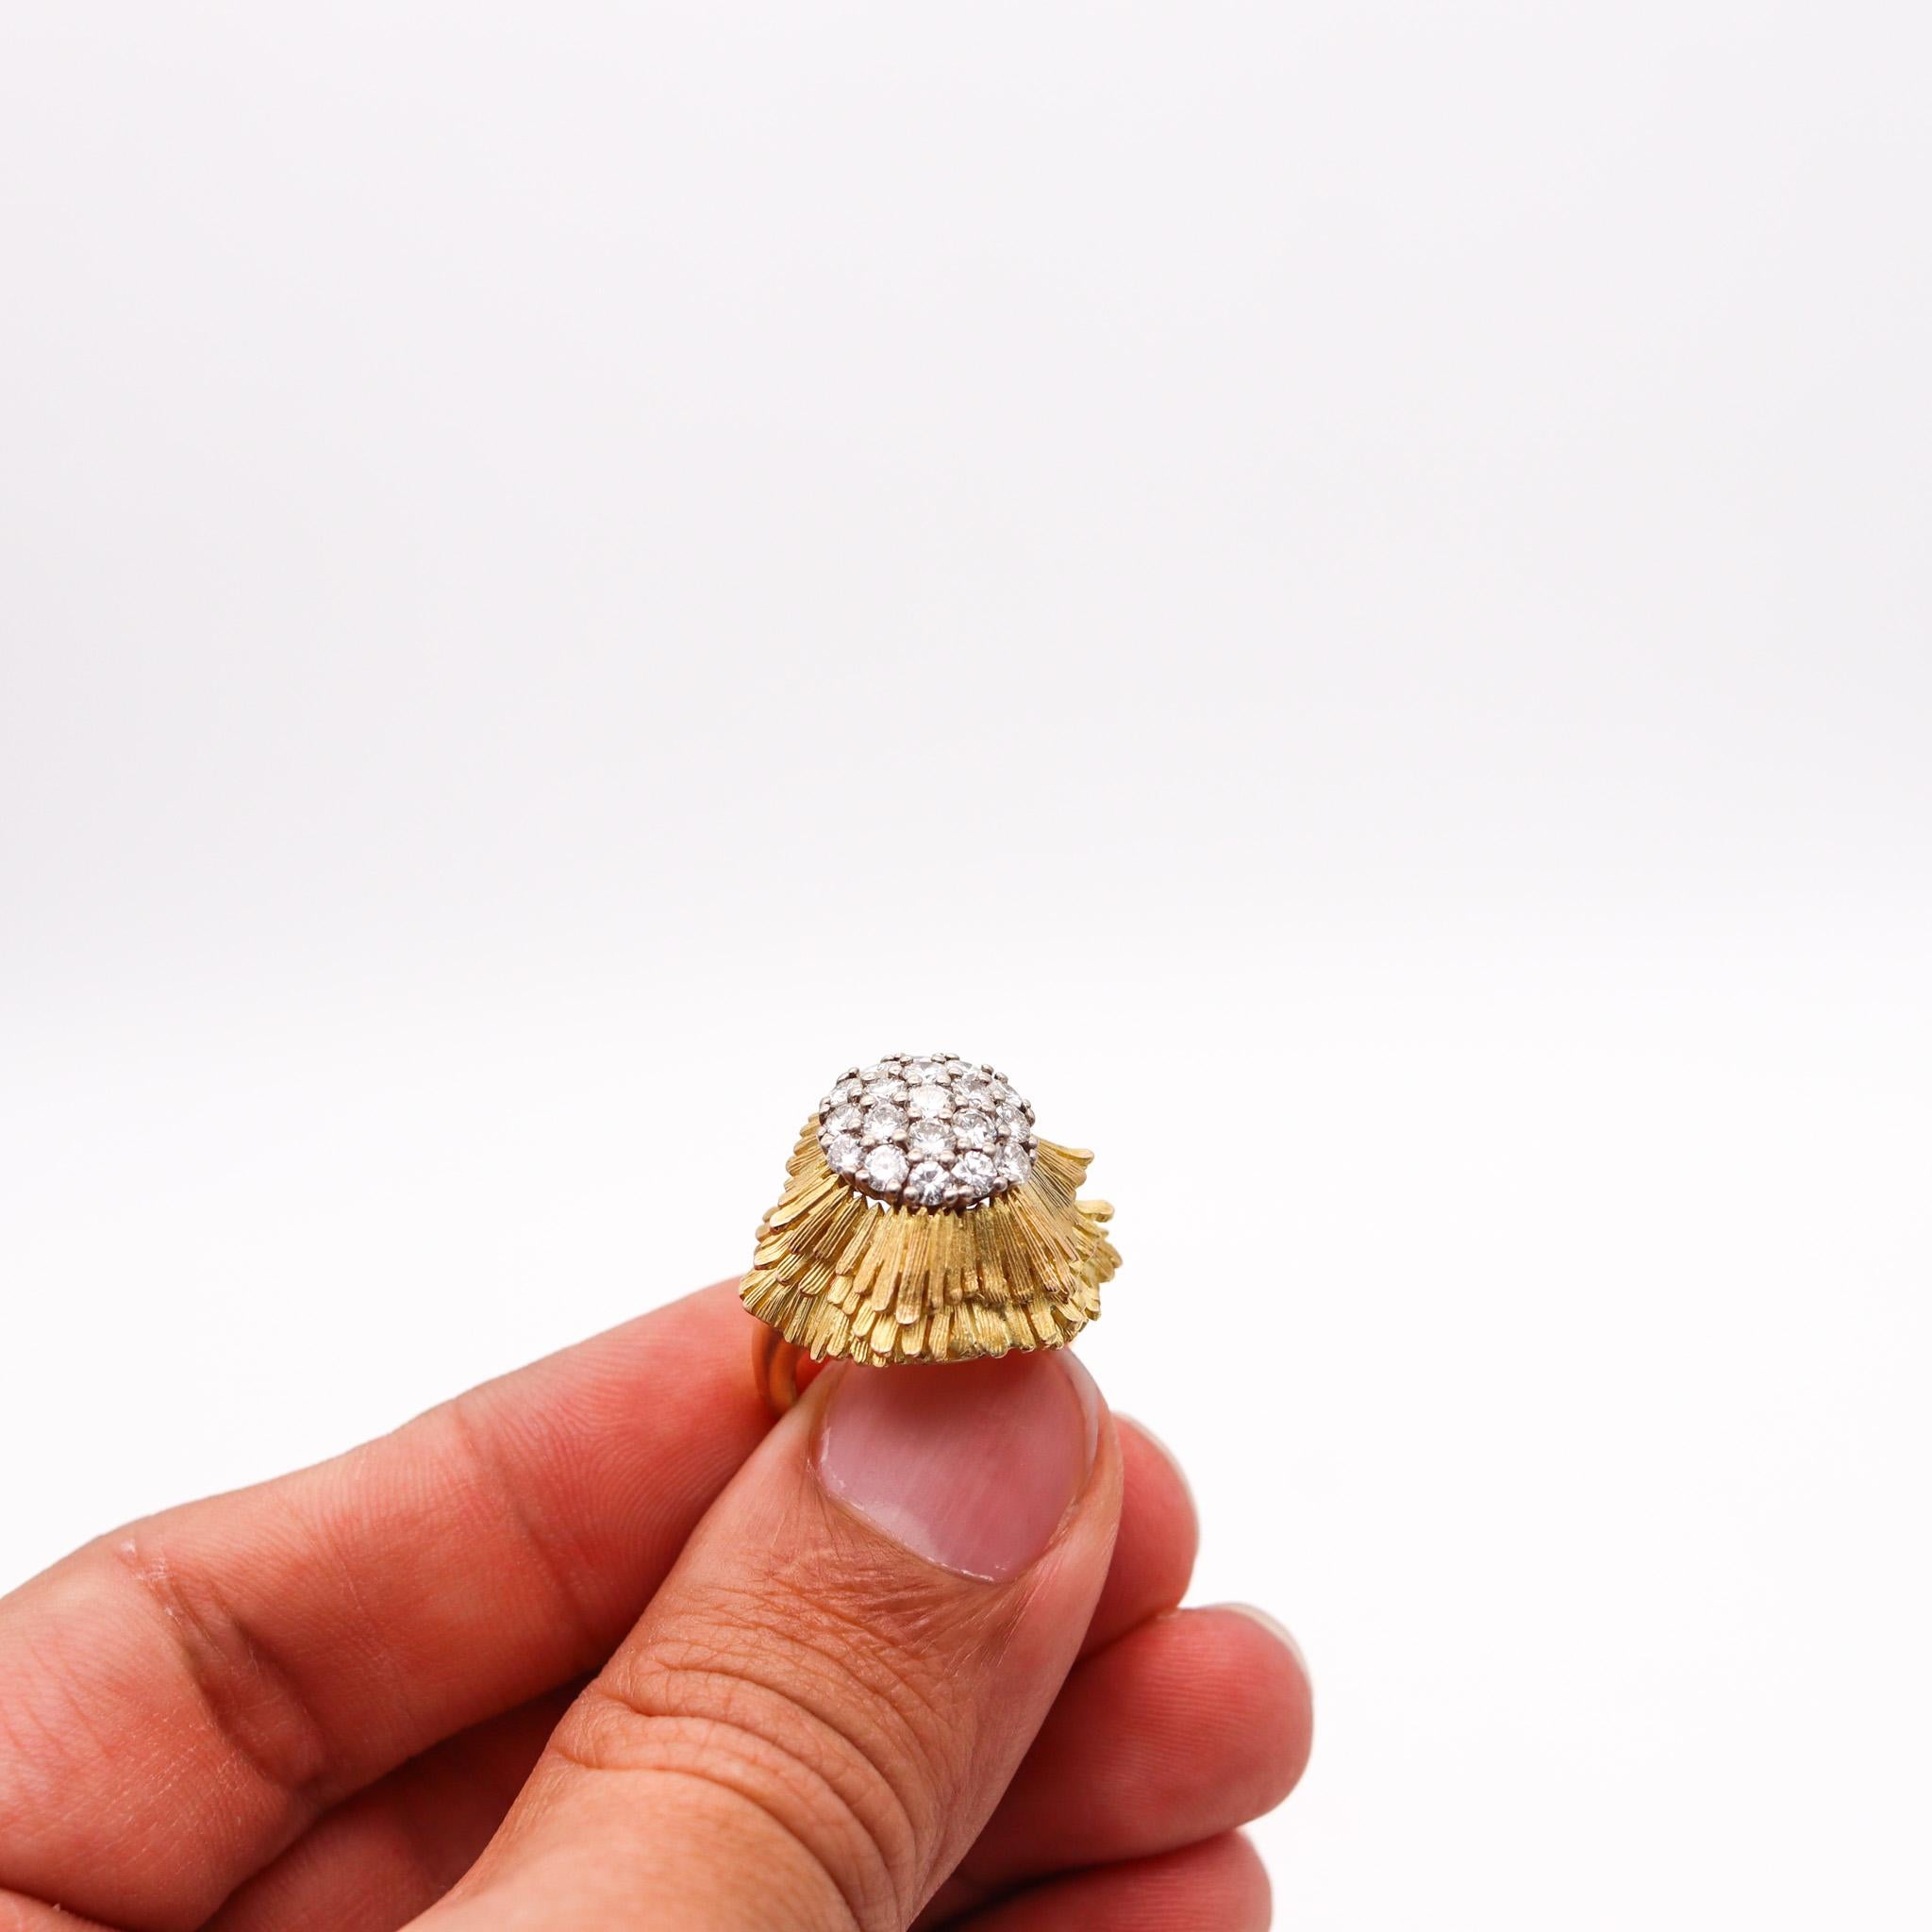 Tiffany & Co. 1960 Cluster Cocktail Ring In 18Kt Gold With 1.74 Ctw In Diamonds For Sale 1